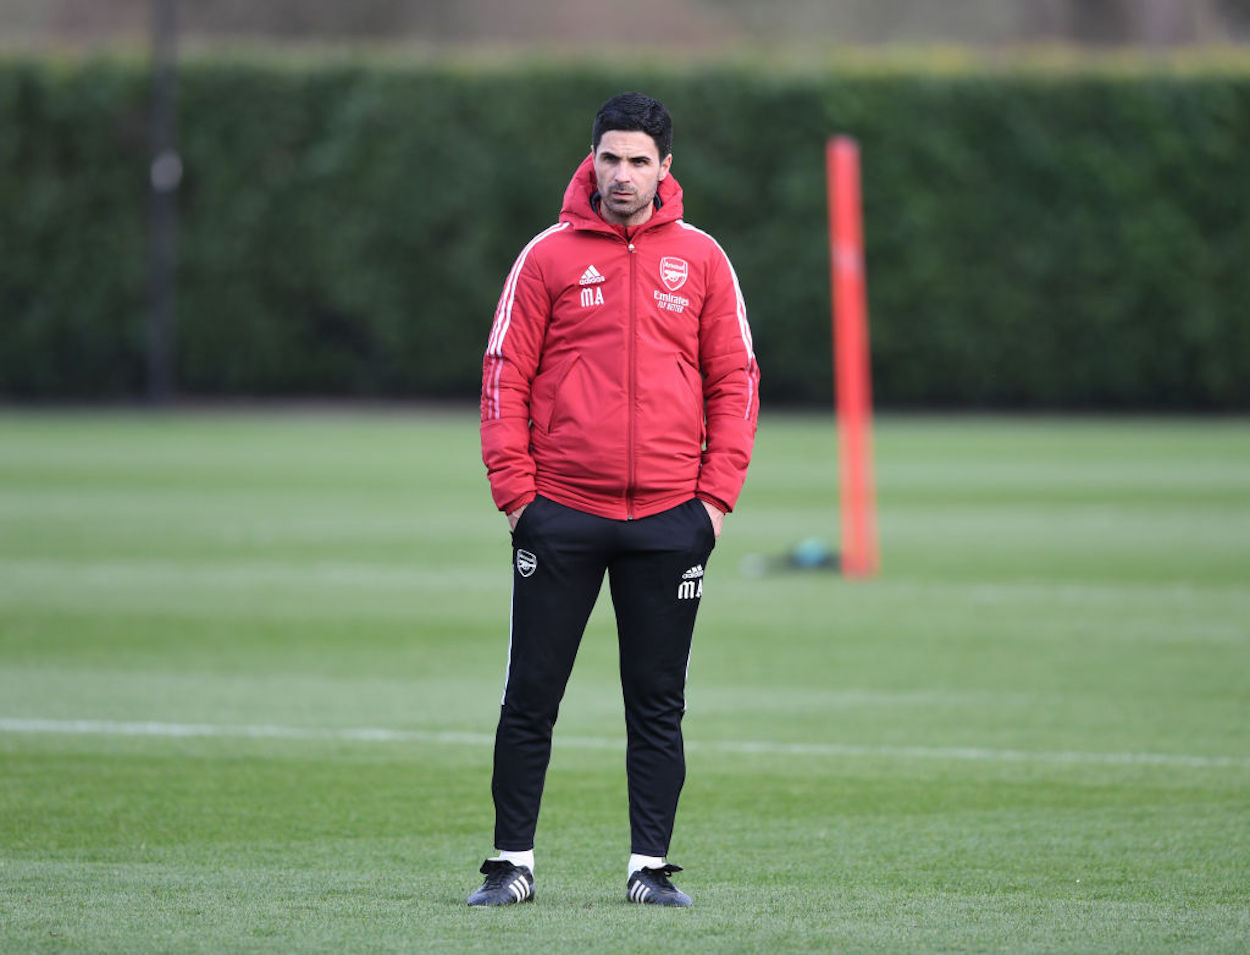 Mikel Arteta Has the Perfect Reminder for Arsenal Supporters Ahead of the Liverpool Match